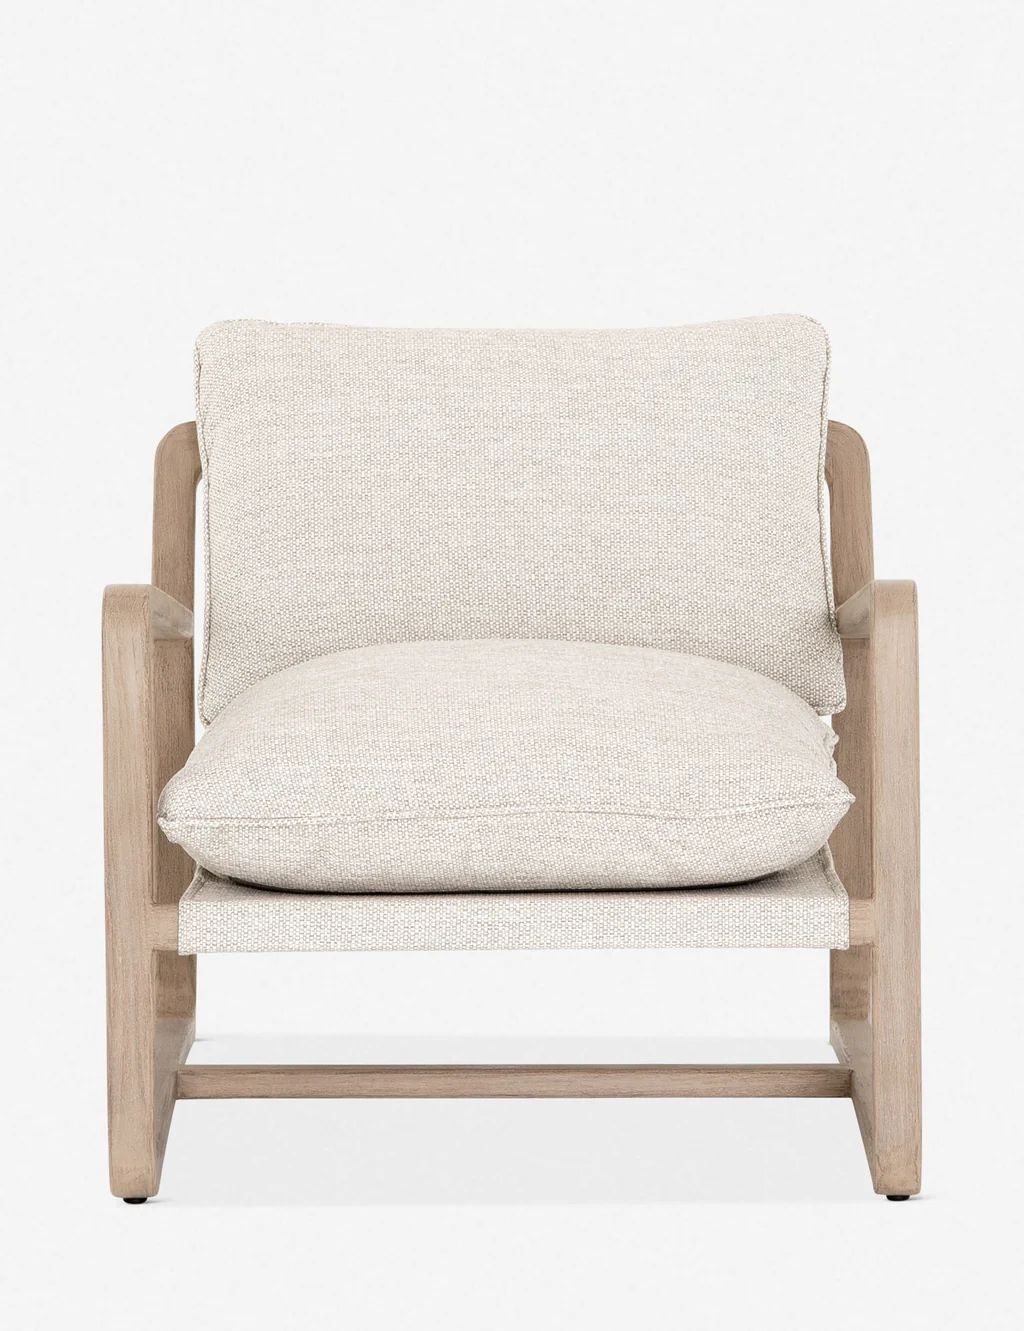 Nunelle Indoor / Outdoor Accent Chair | Lulu and Georgia 